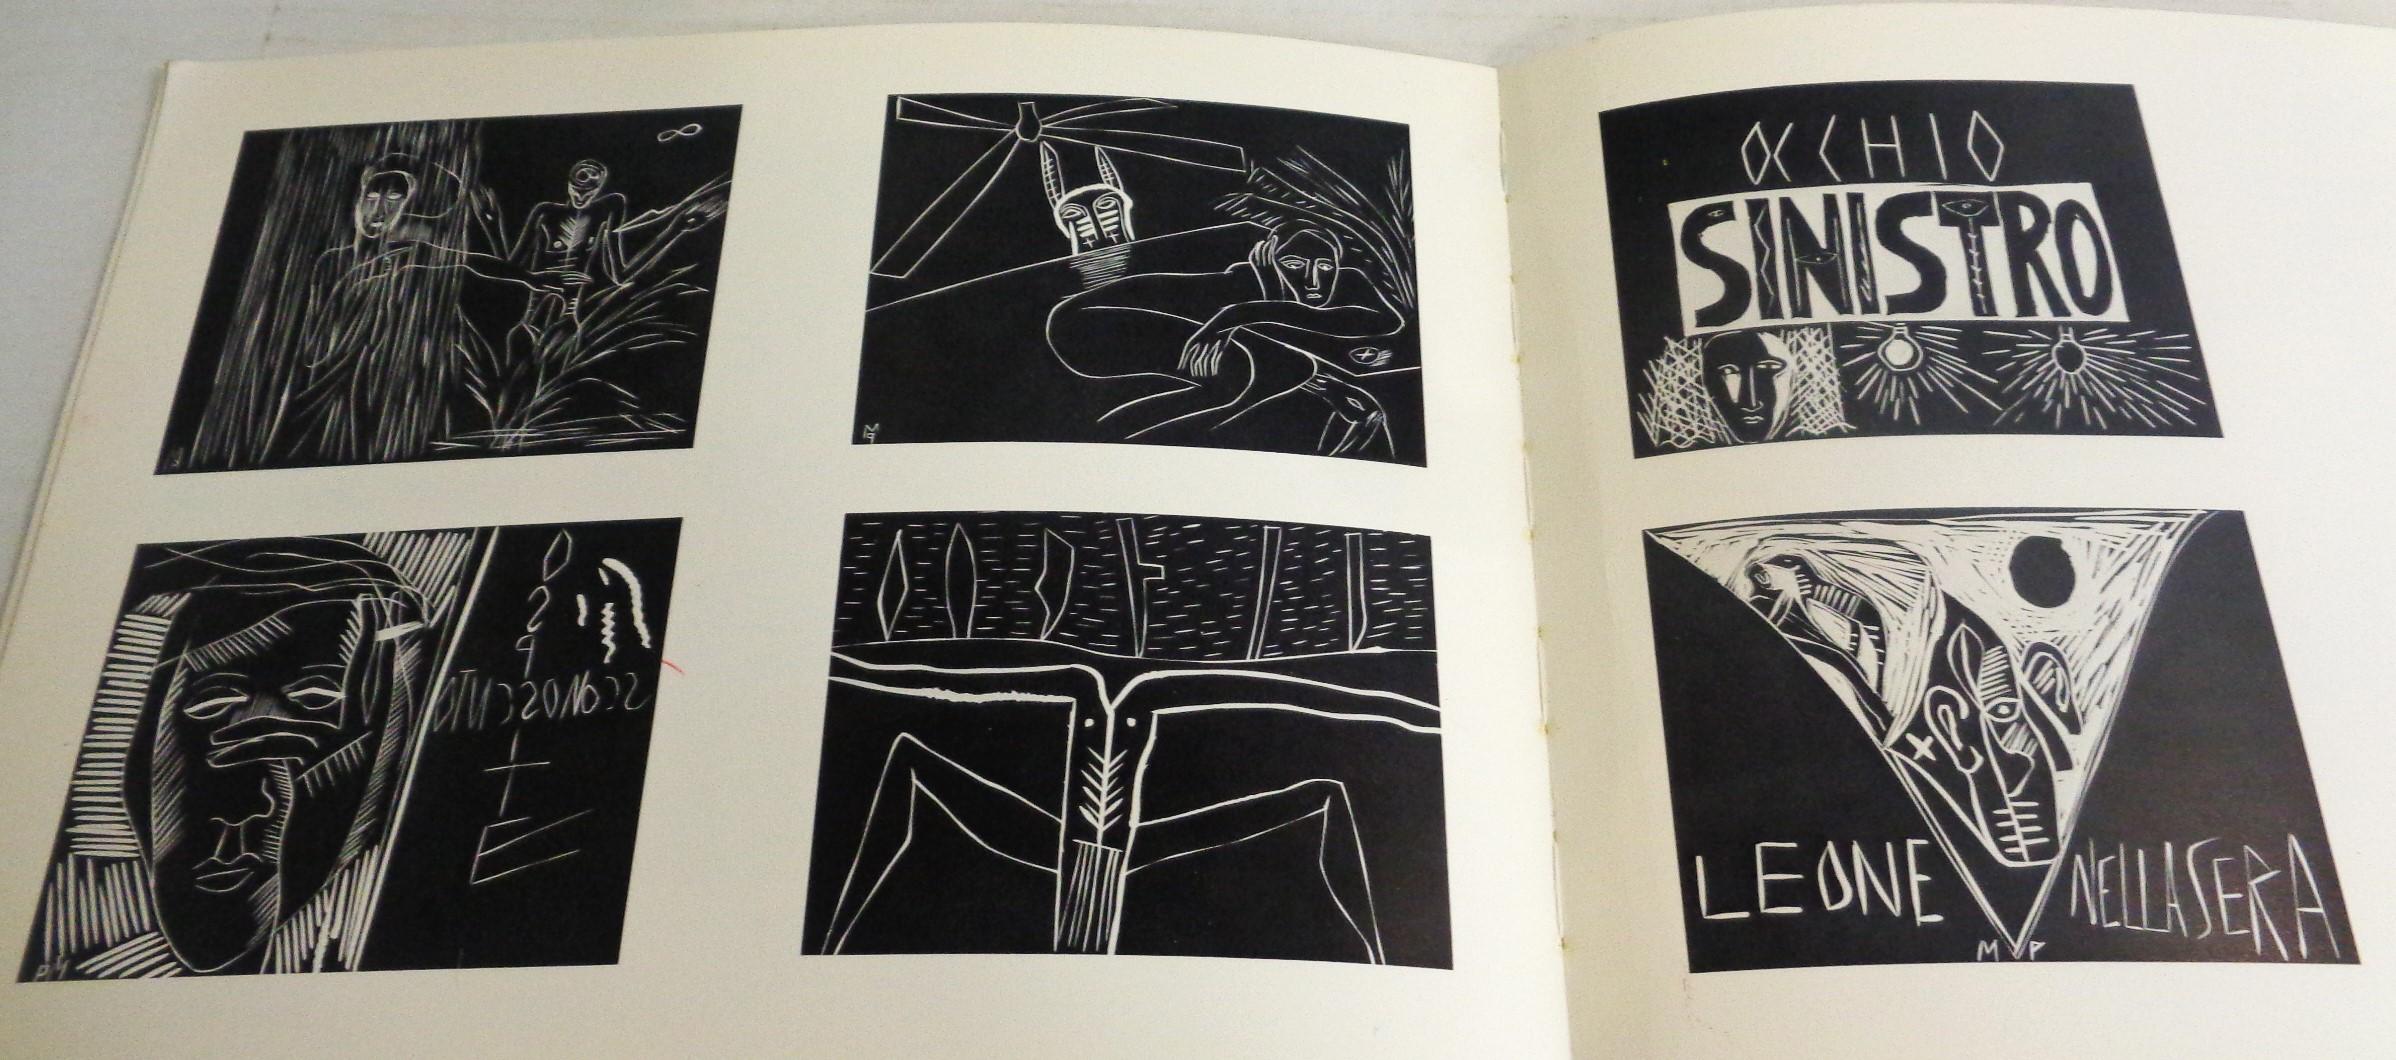 MIMMO PALADINO Etchings Woodcuts and Linocuts 1983 - 1986 - Exhibition Catalogue For Sale 2